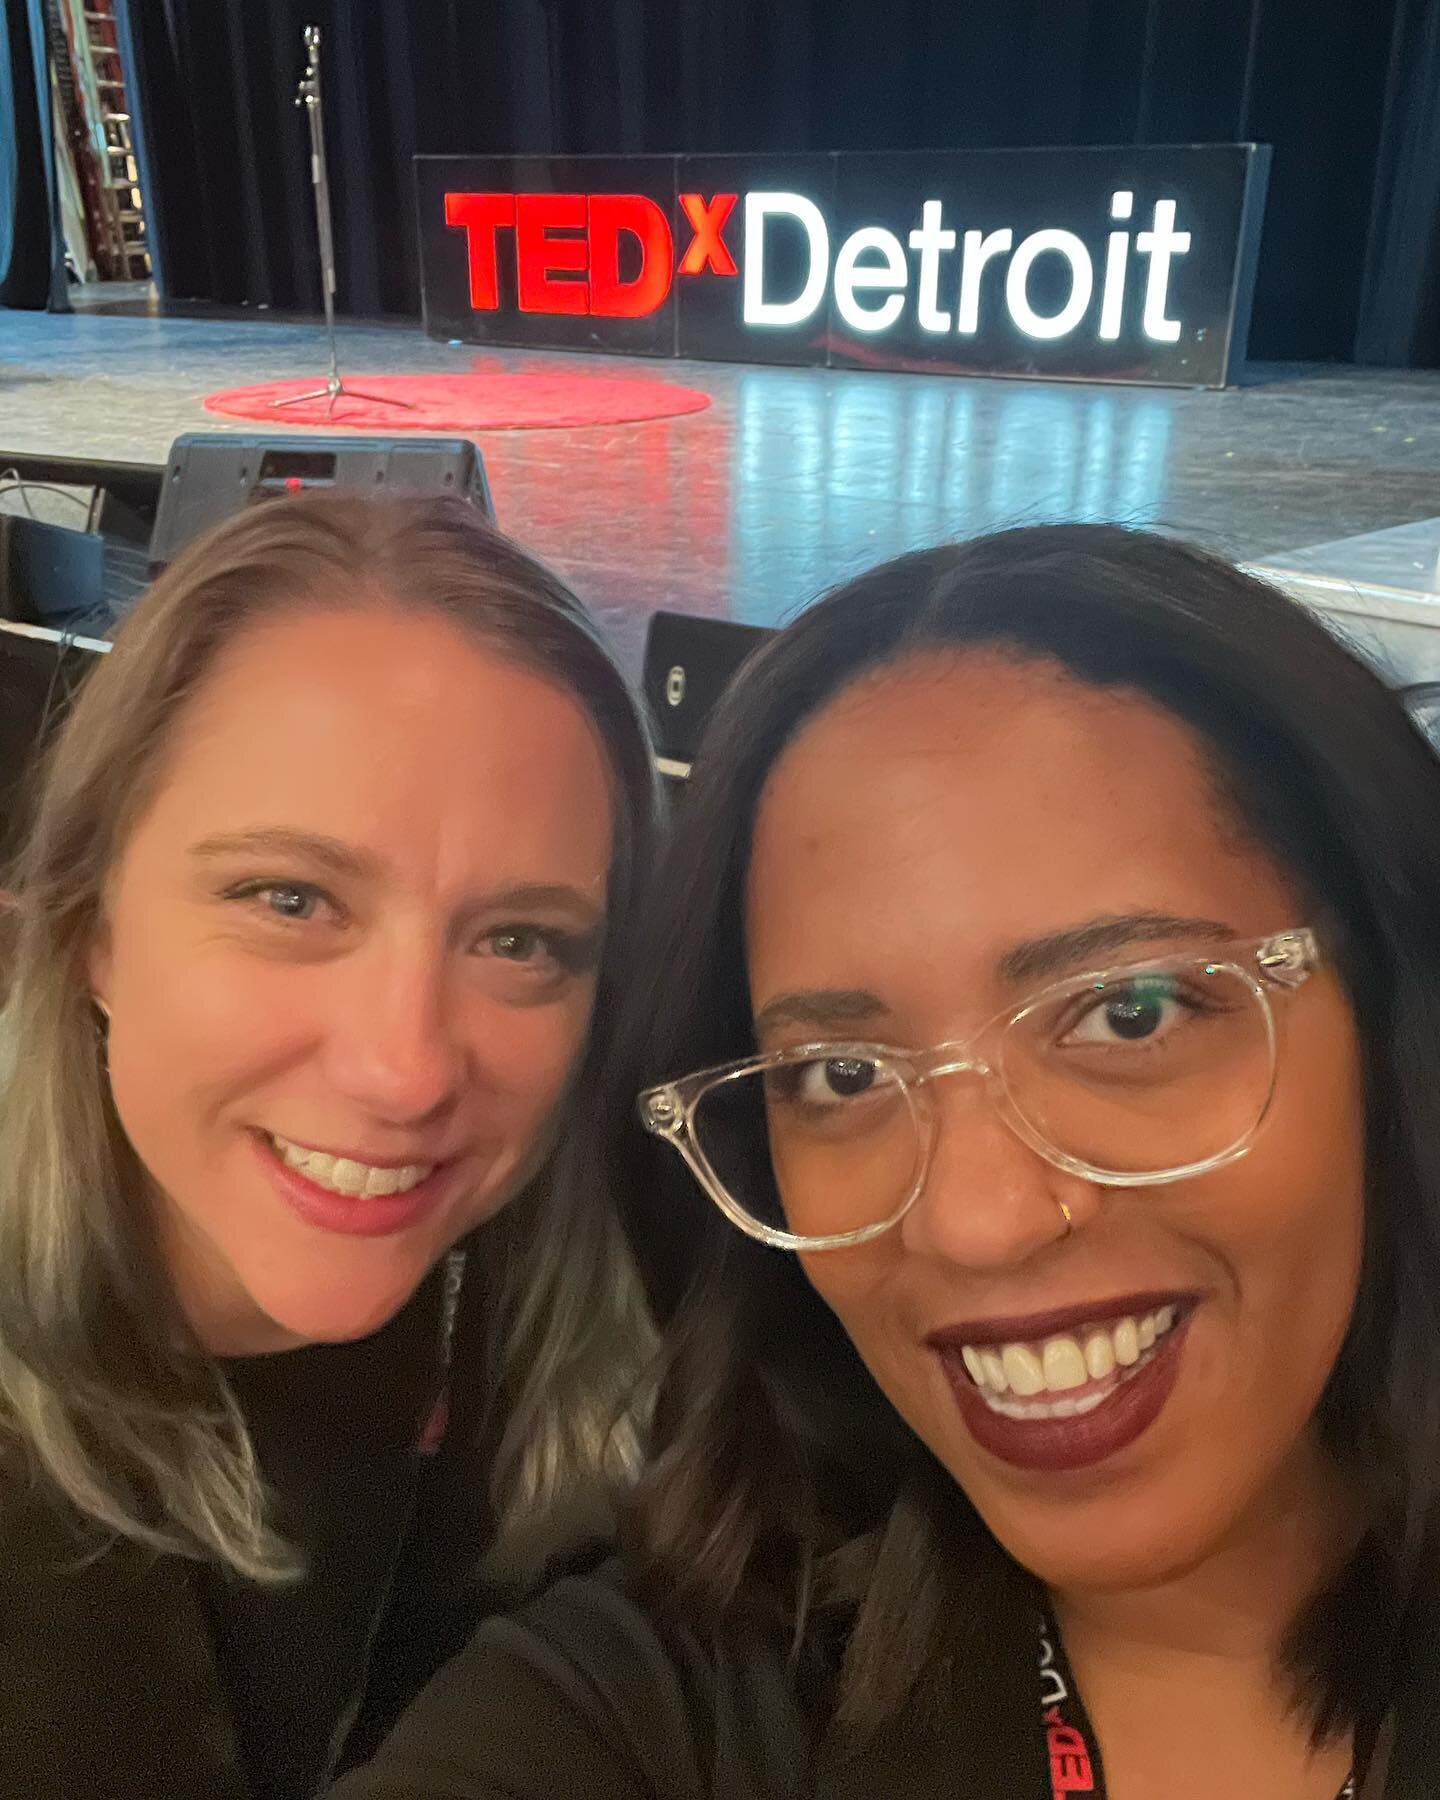 Spending the day with @awesomealycia at @ted #tedxdetroit 🥰🥰🥰

#dei #diversity #inclusion #equity #diversityandinclusion #diversityequityinclusion #leadership #diversitymatters #allyship #education #inclusionmatters #representationmatters  #social